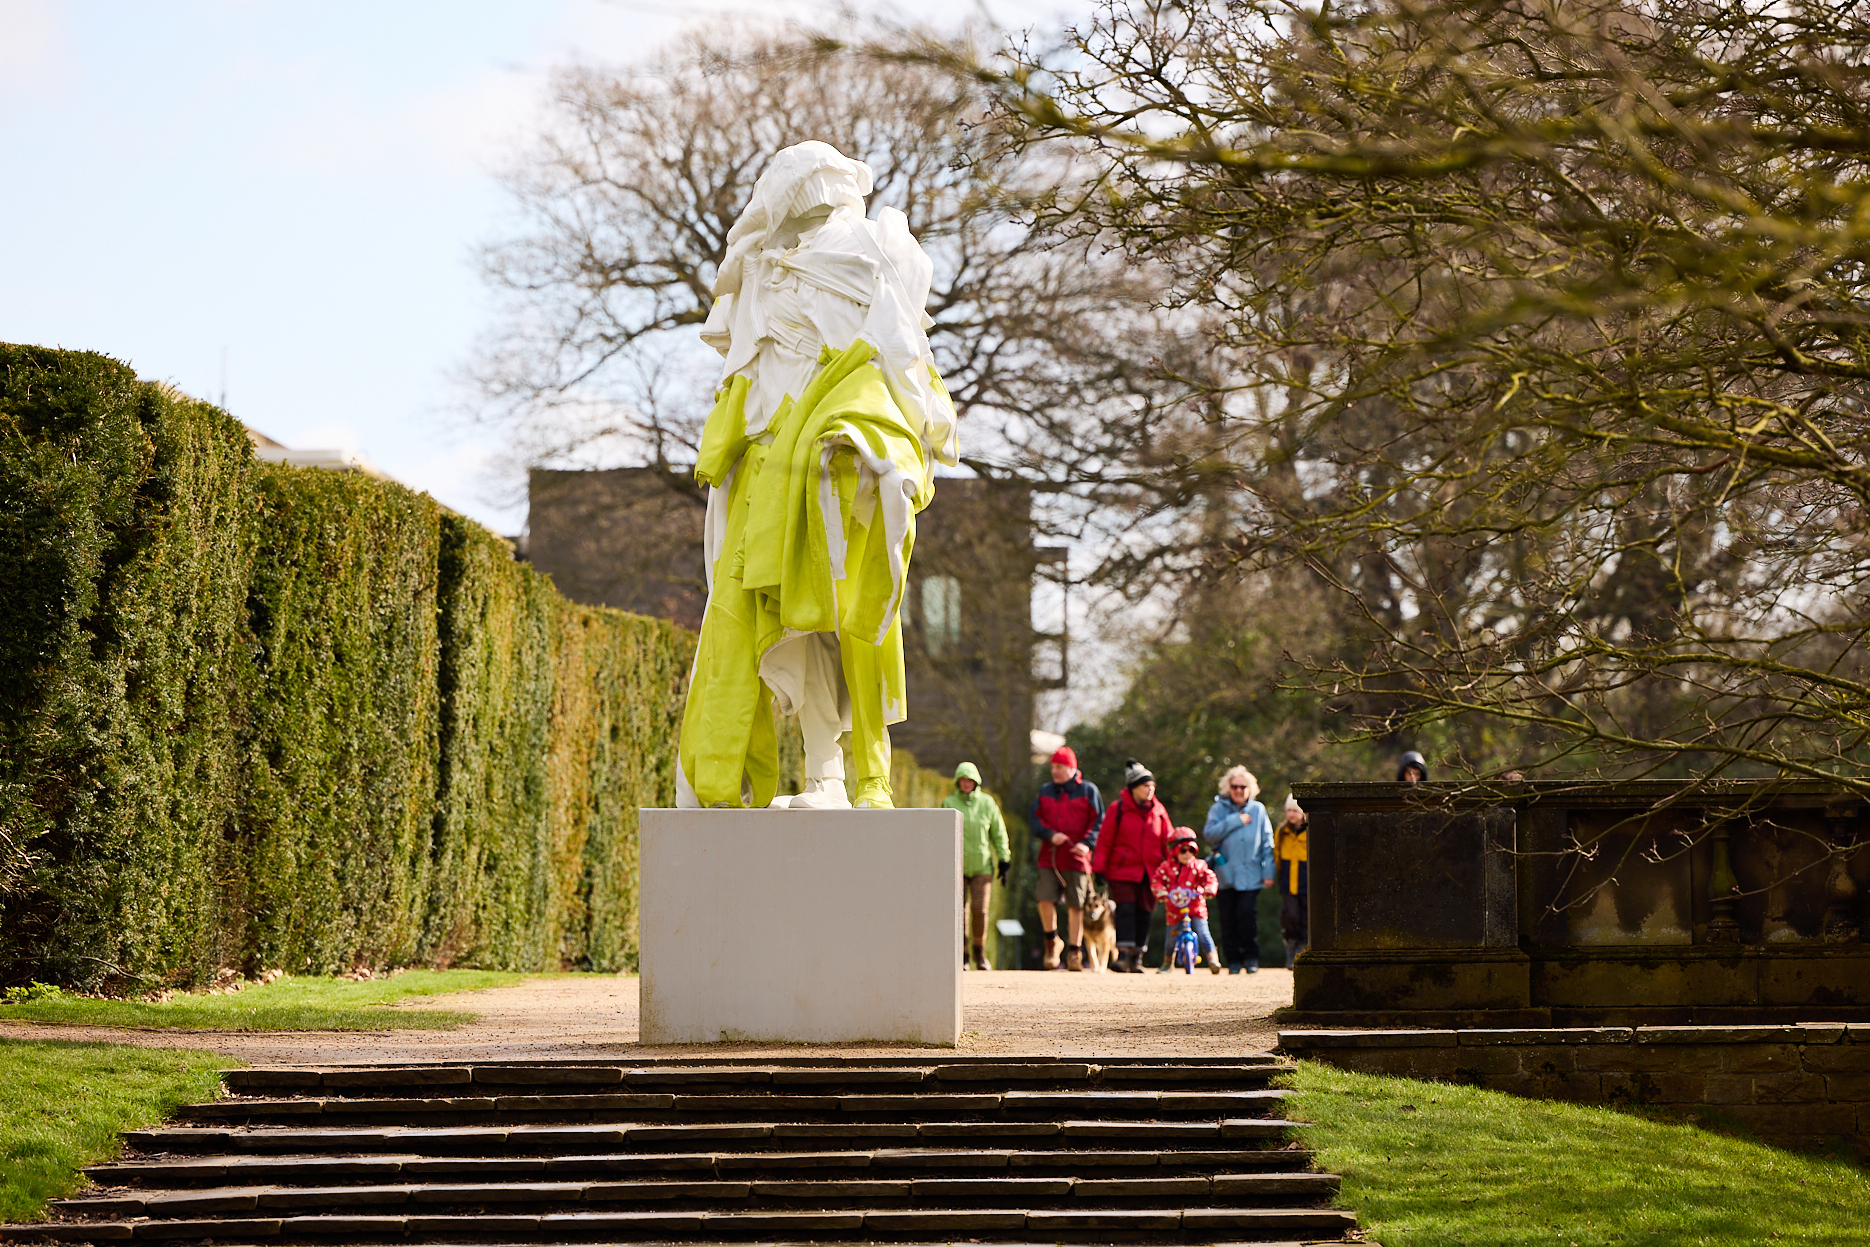 A group of people in colourful coats walking towards a yellow and white sculpture of a figure draped in clothing